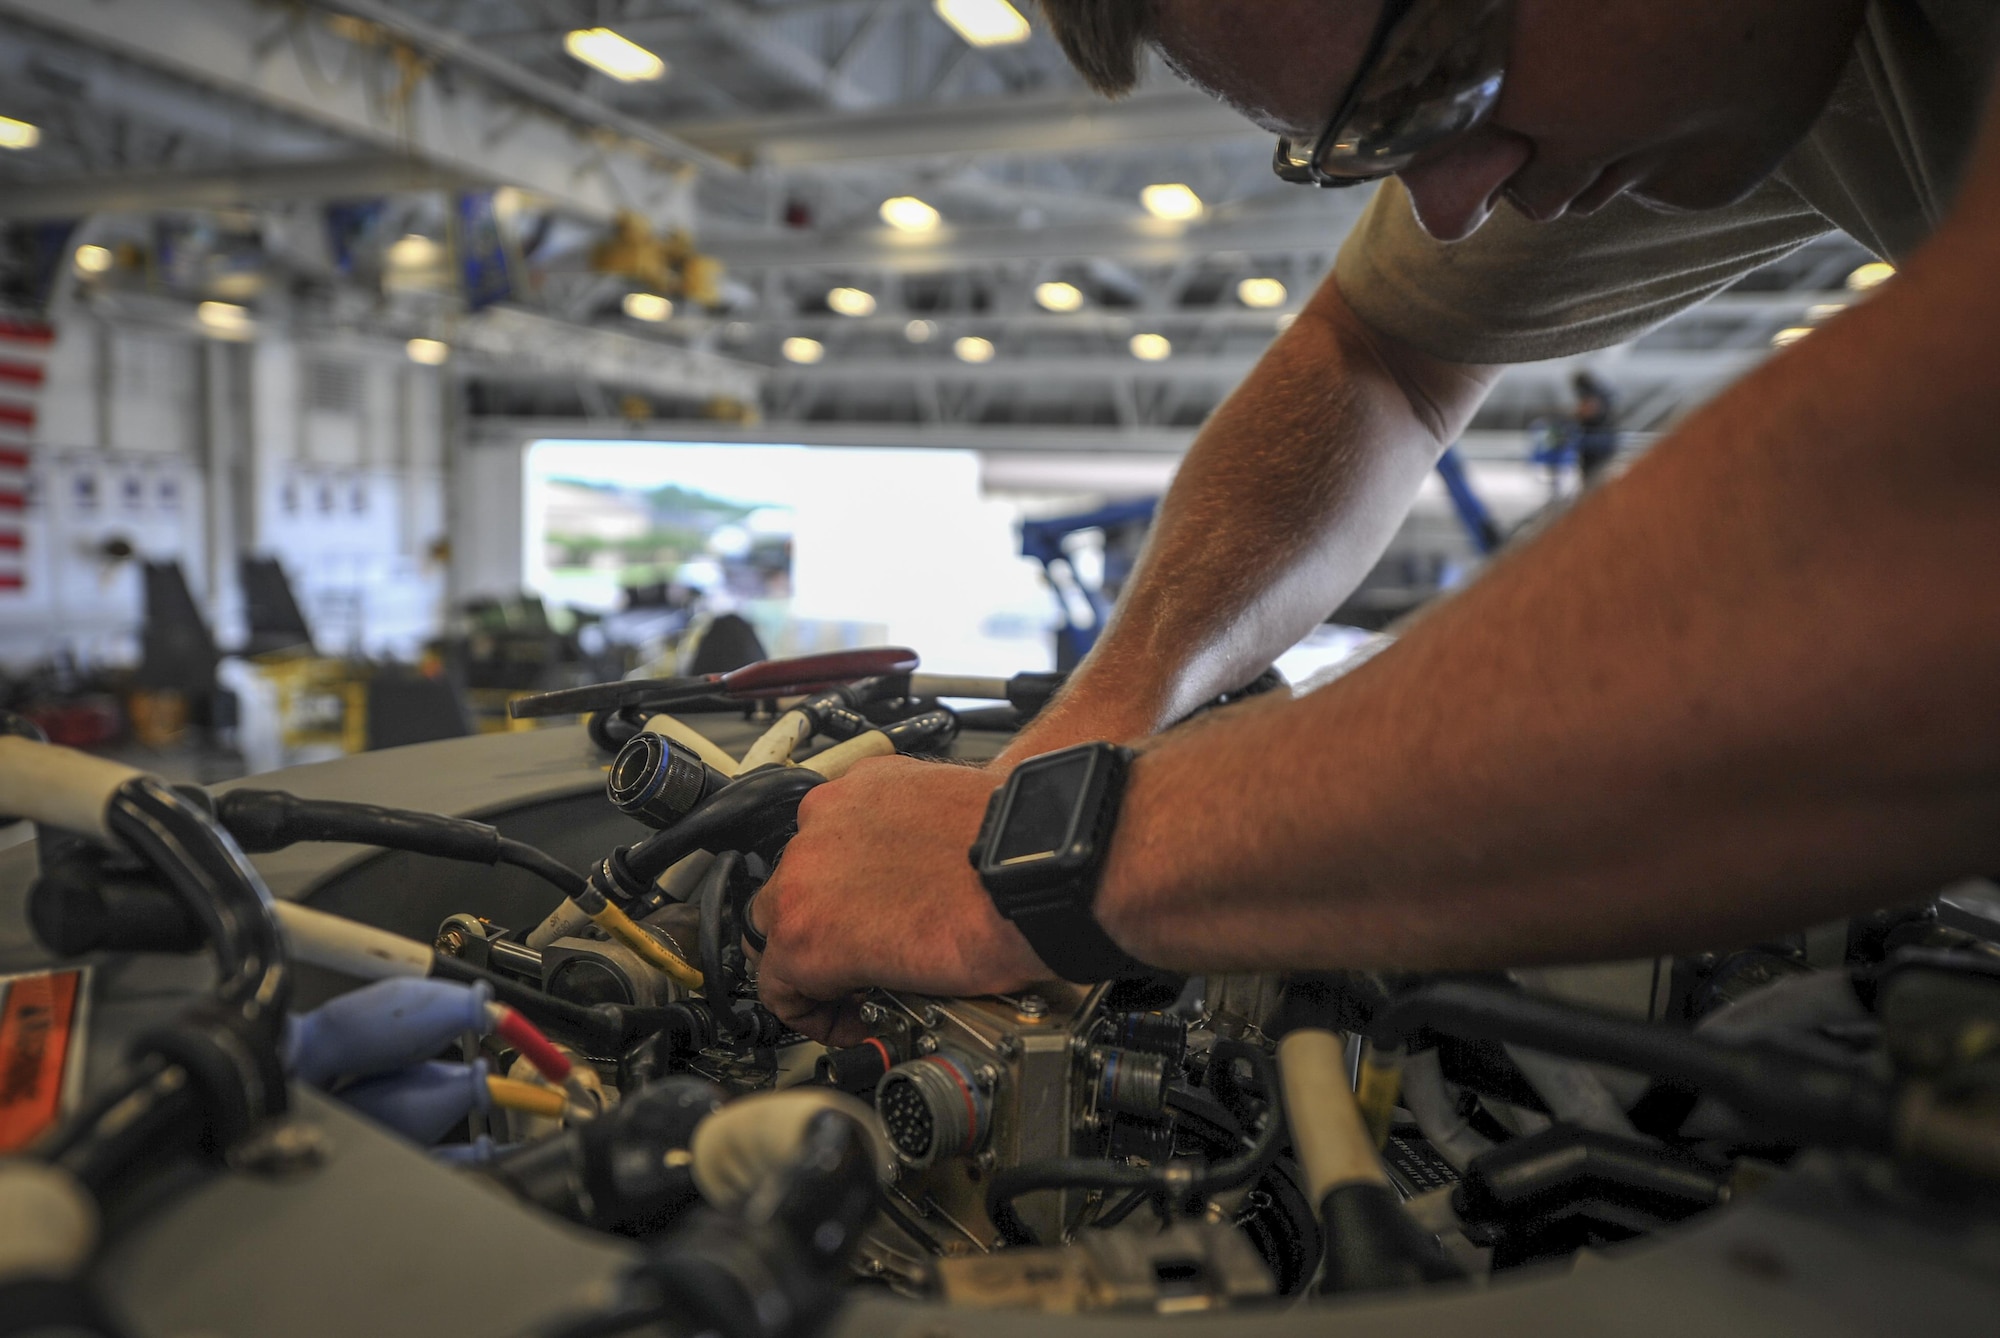 Staff Sgt. Robert Hillyard, a crew chief with the 801st Special Operations Aircraft Maintenance Squadron, performs maintenance on the tiltrotor of a CV-22B Osprey at Hurlburt Field, Fla., Aug. 11, 2016. Crew chiefs with the 801st SOAMXS ensure aircraft are ready to fly at a moment’s notice to provide combat ready forces anytime, anyplace. (U.S. Air Force photo by Airman 1st Class Joseph Pick)